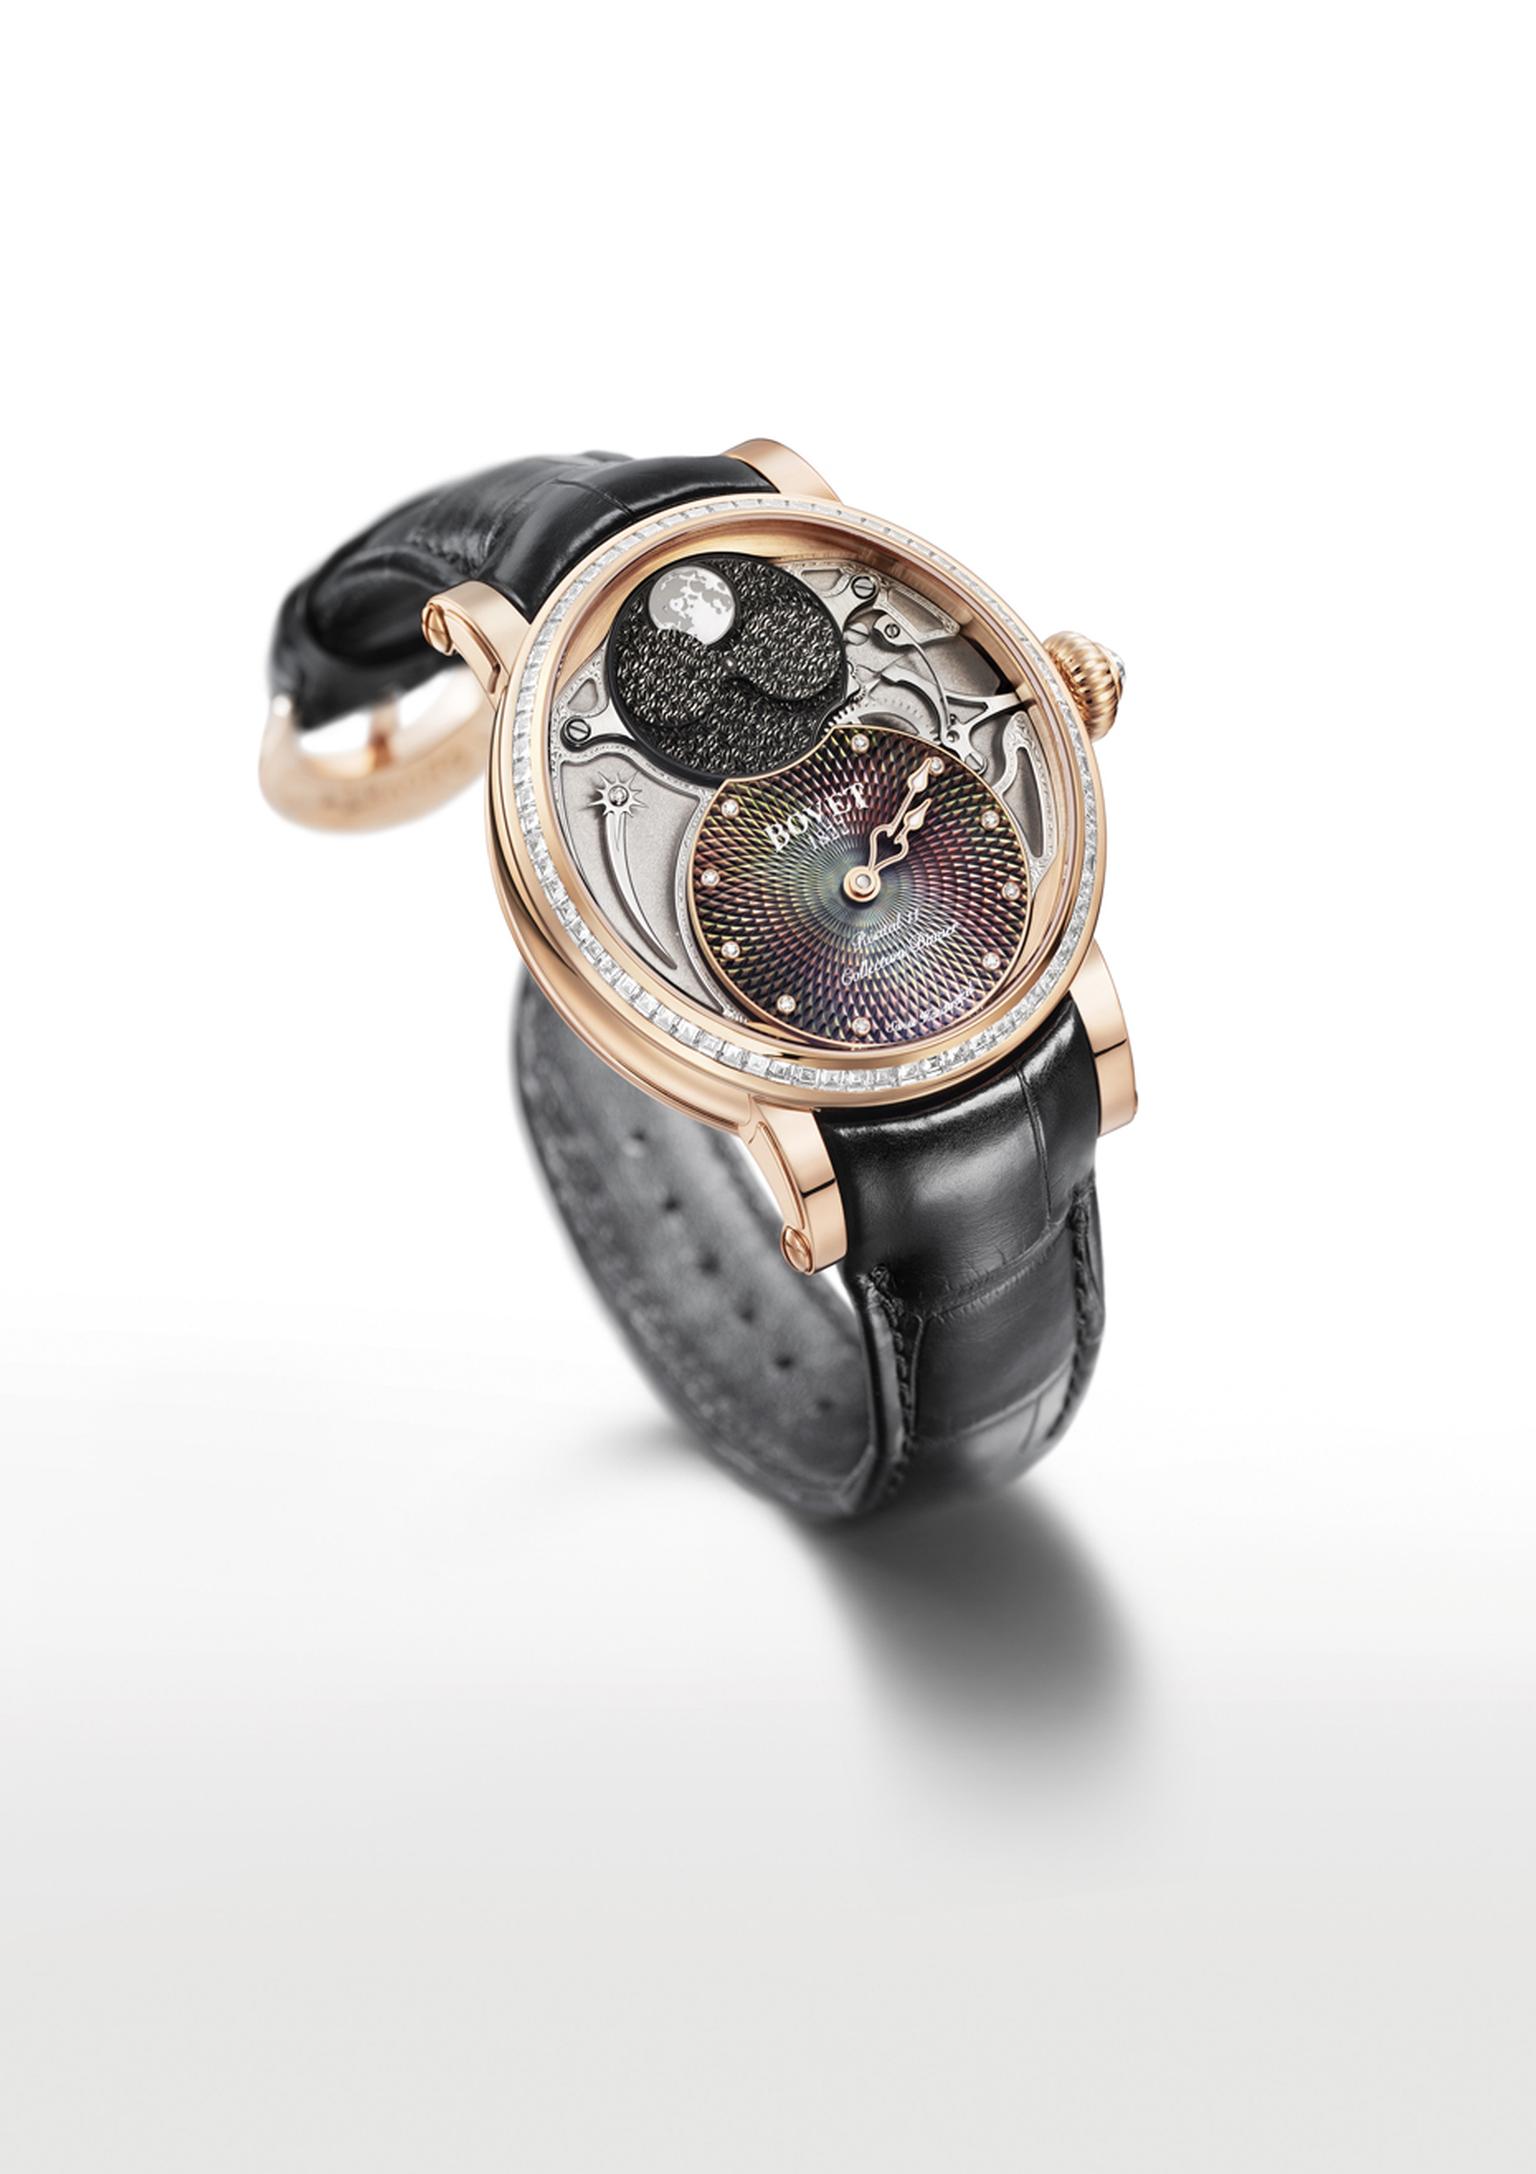 Bovet's Recital 11 Miss Alexandra watch features unusual-shaped hour and minute hands that form a heart once an hour when they meet.